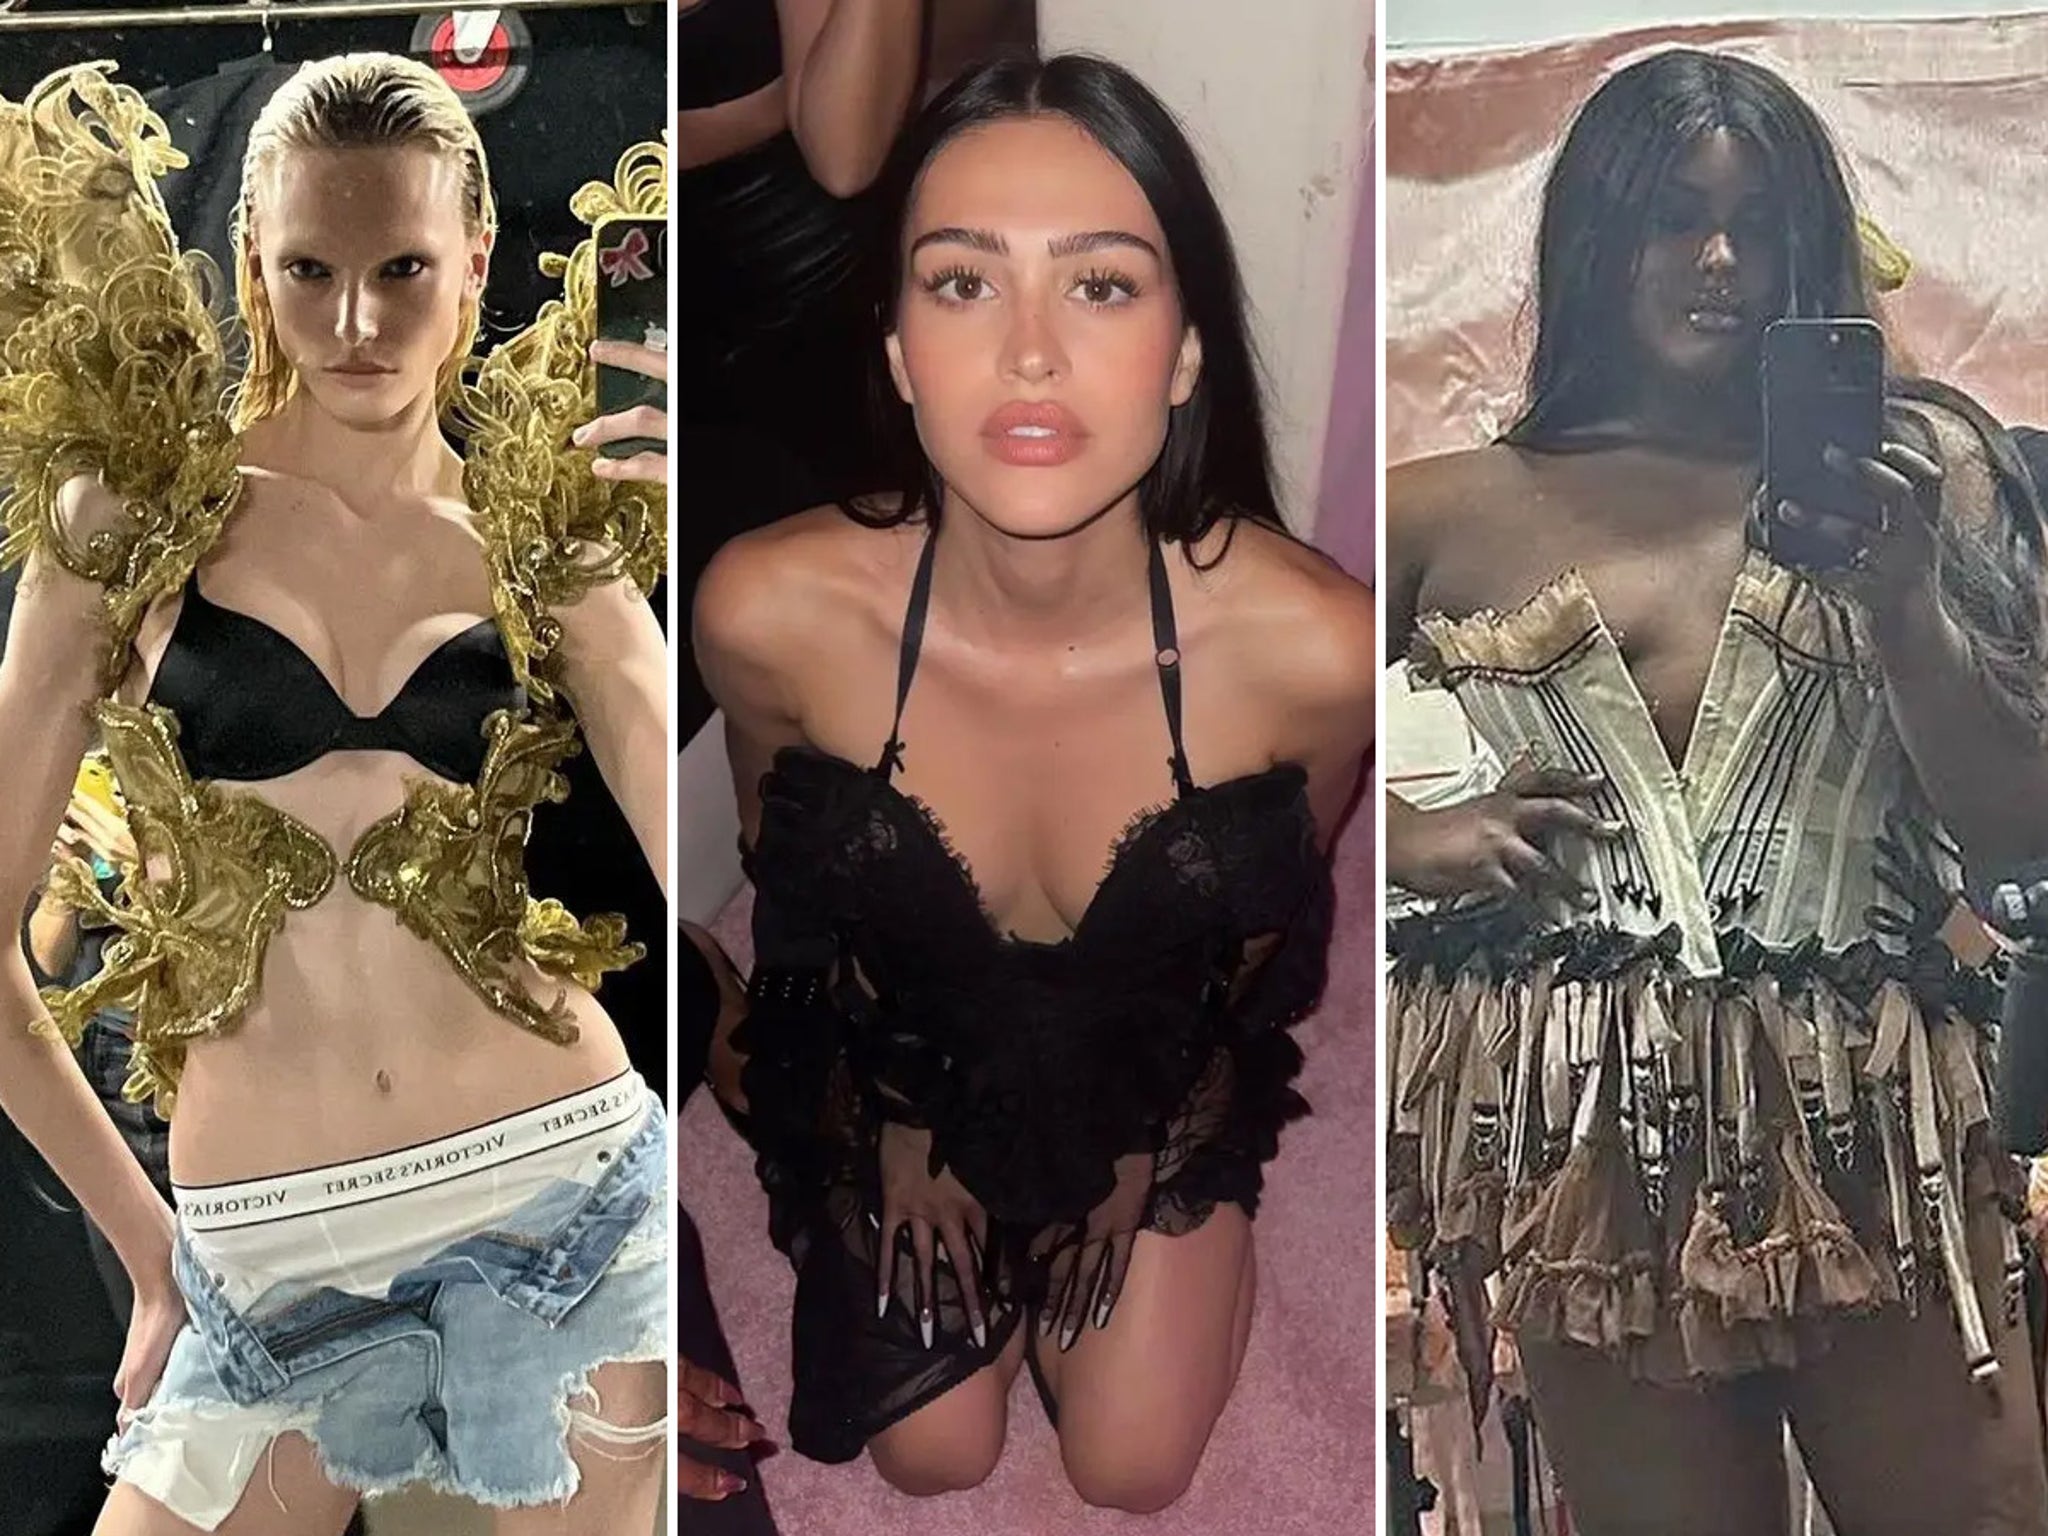 The Victoria's Secret fashion show is coming back. What's changed